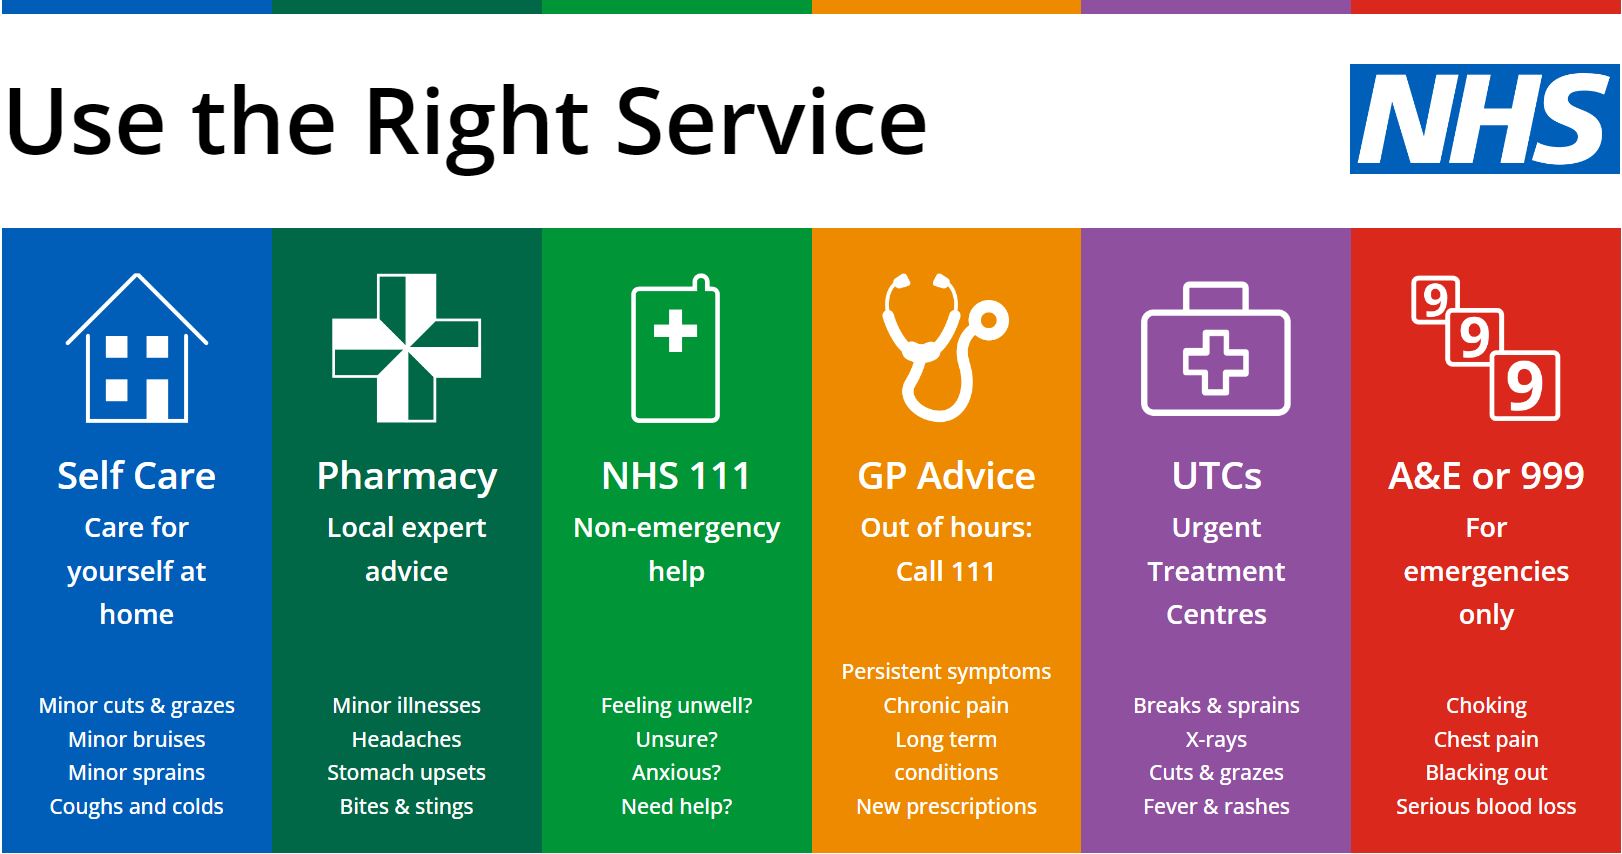 NHS Use the right service